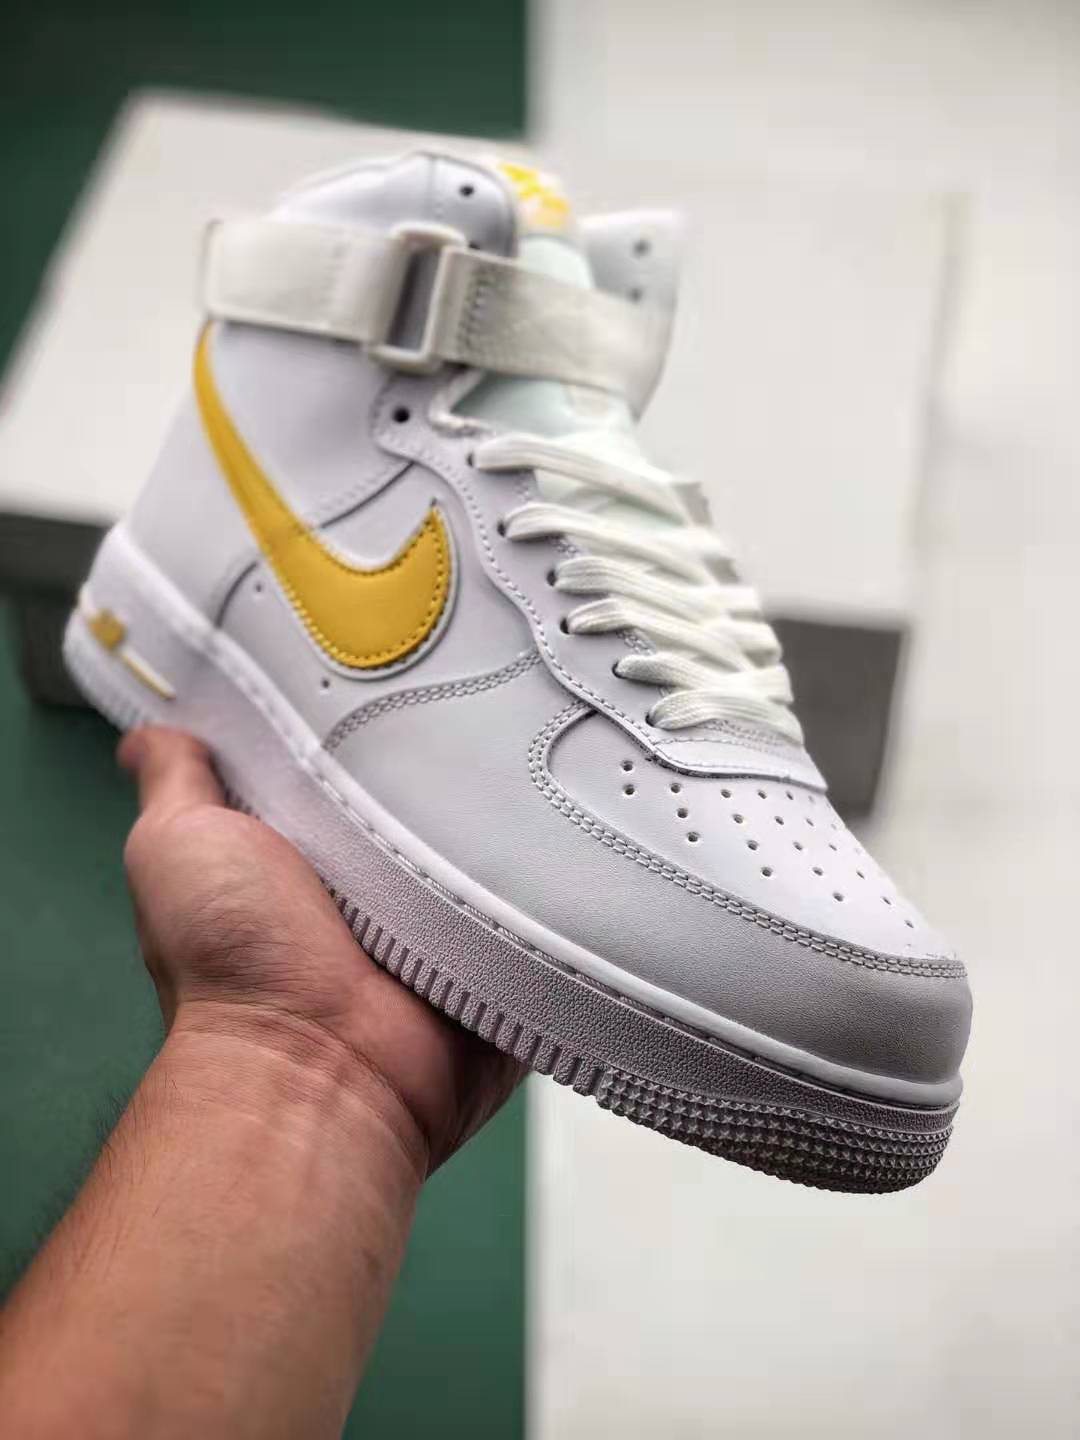 Nike Air Force 1 High '07 'White University Gold' AT4141-101 - Sleek and Stylish Sneakers for Every Occasion